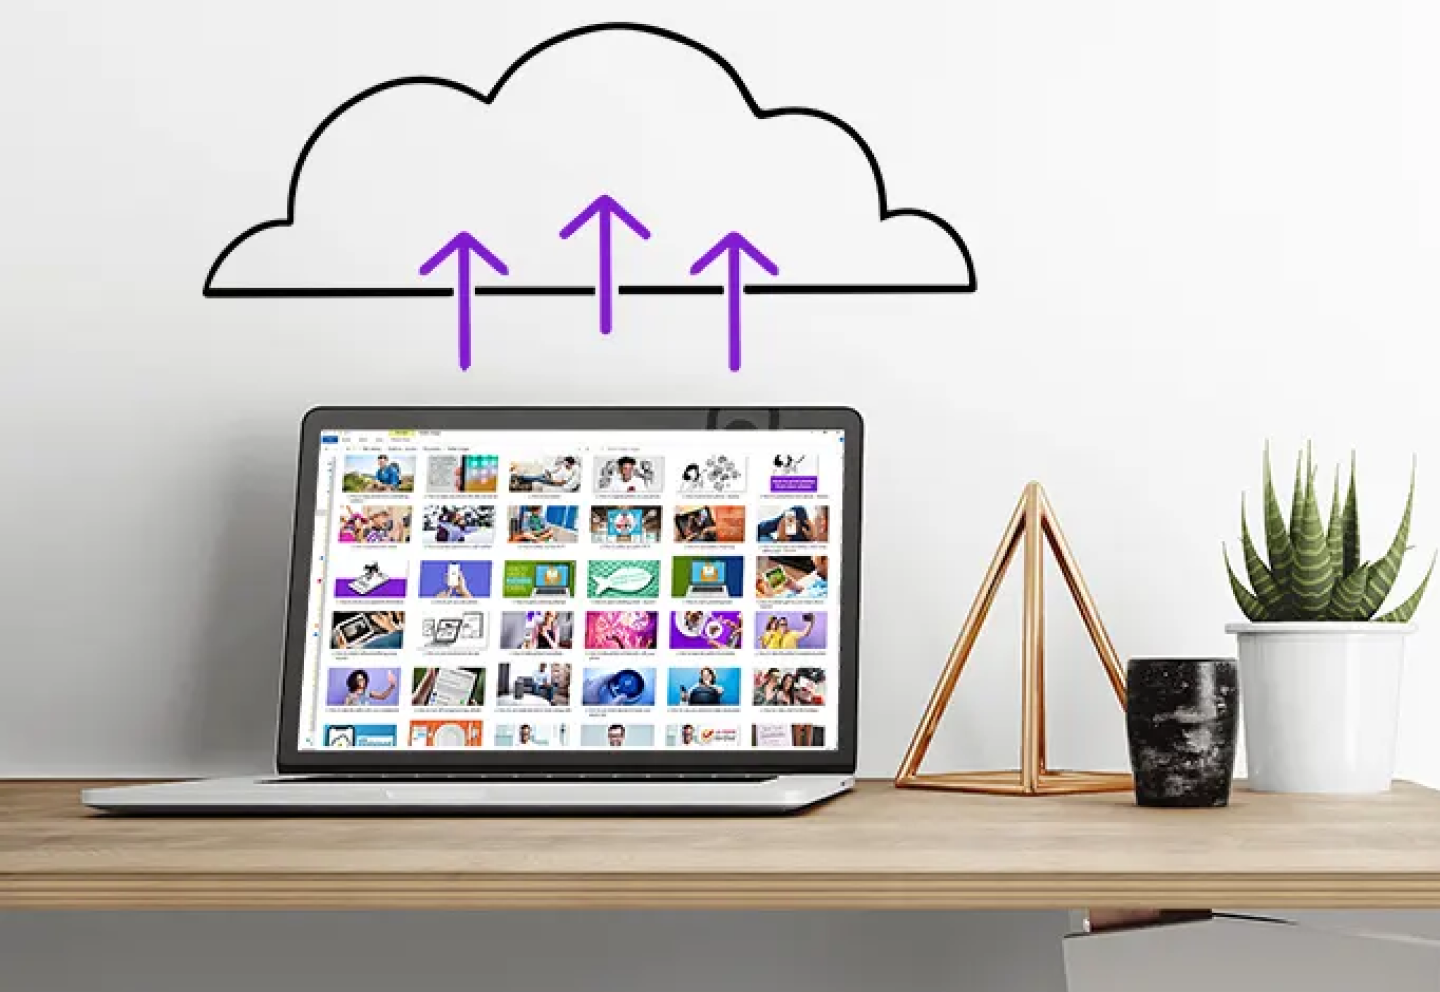 How to use cloud storage on your computer